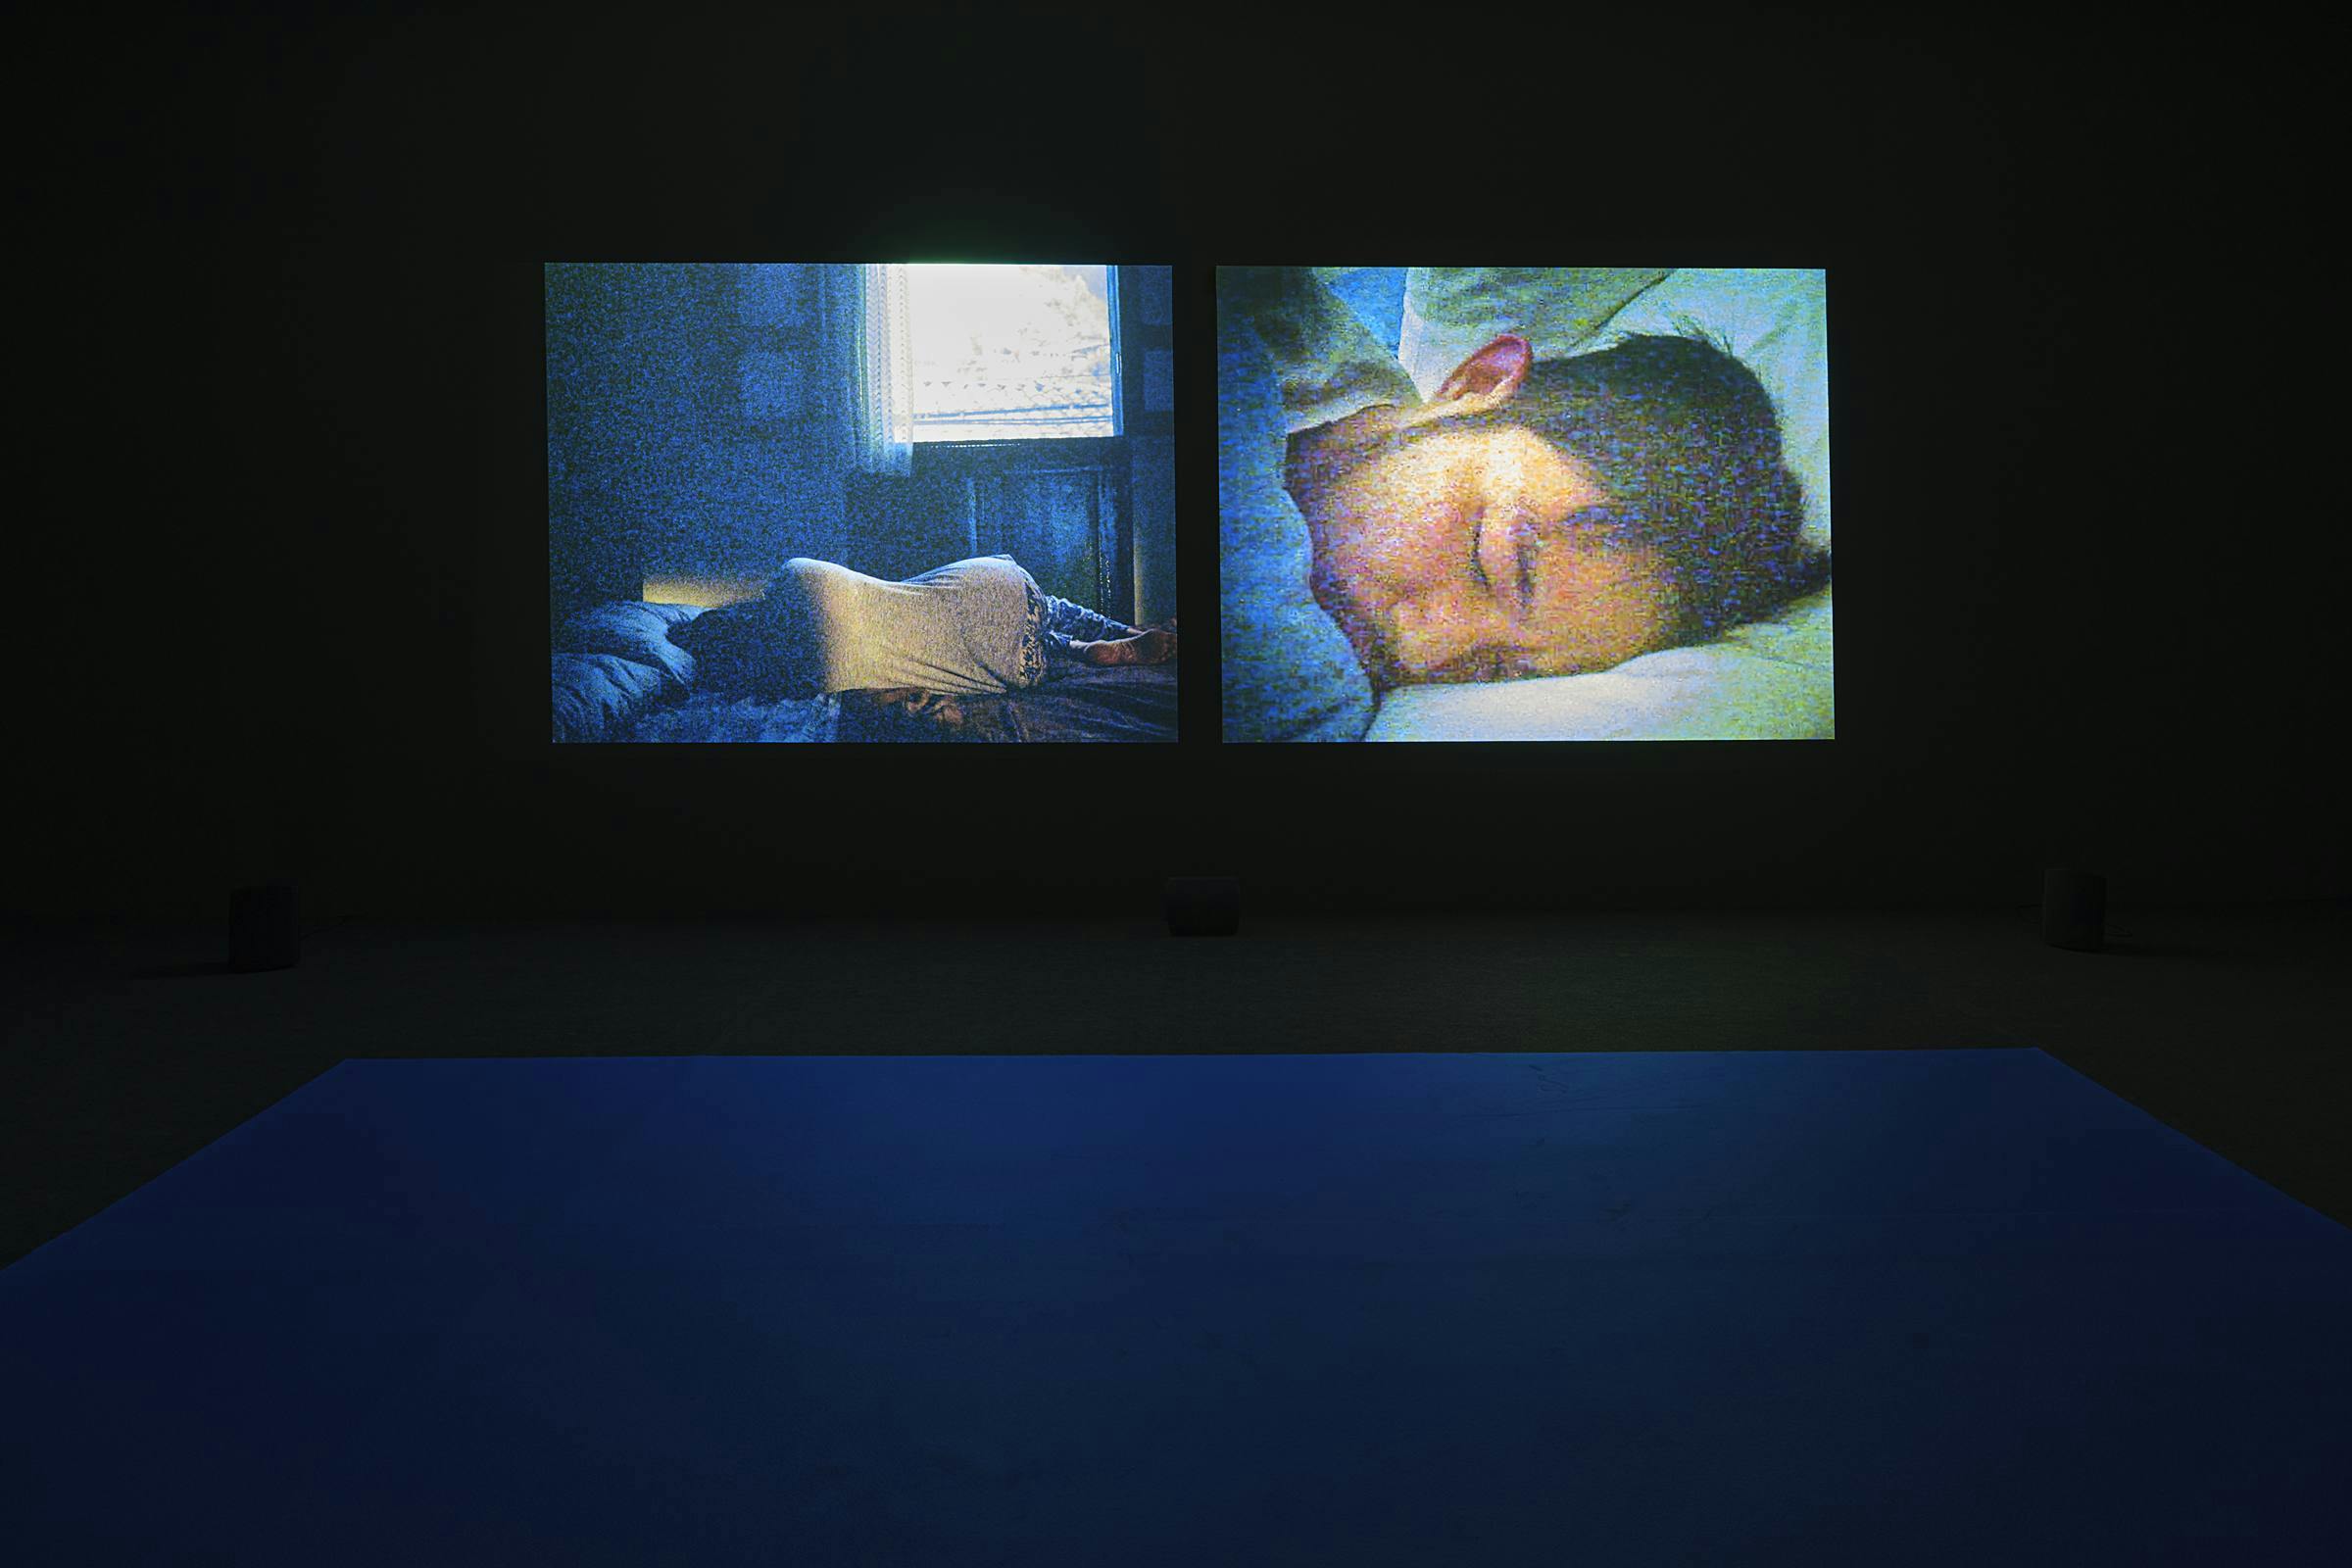 an image of the work Durmiente & async projected in a darkened space. The carpet is blue.